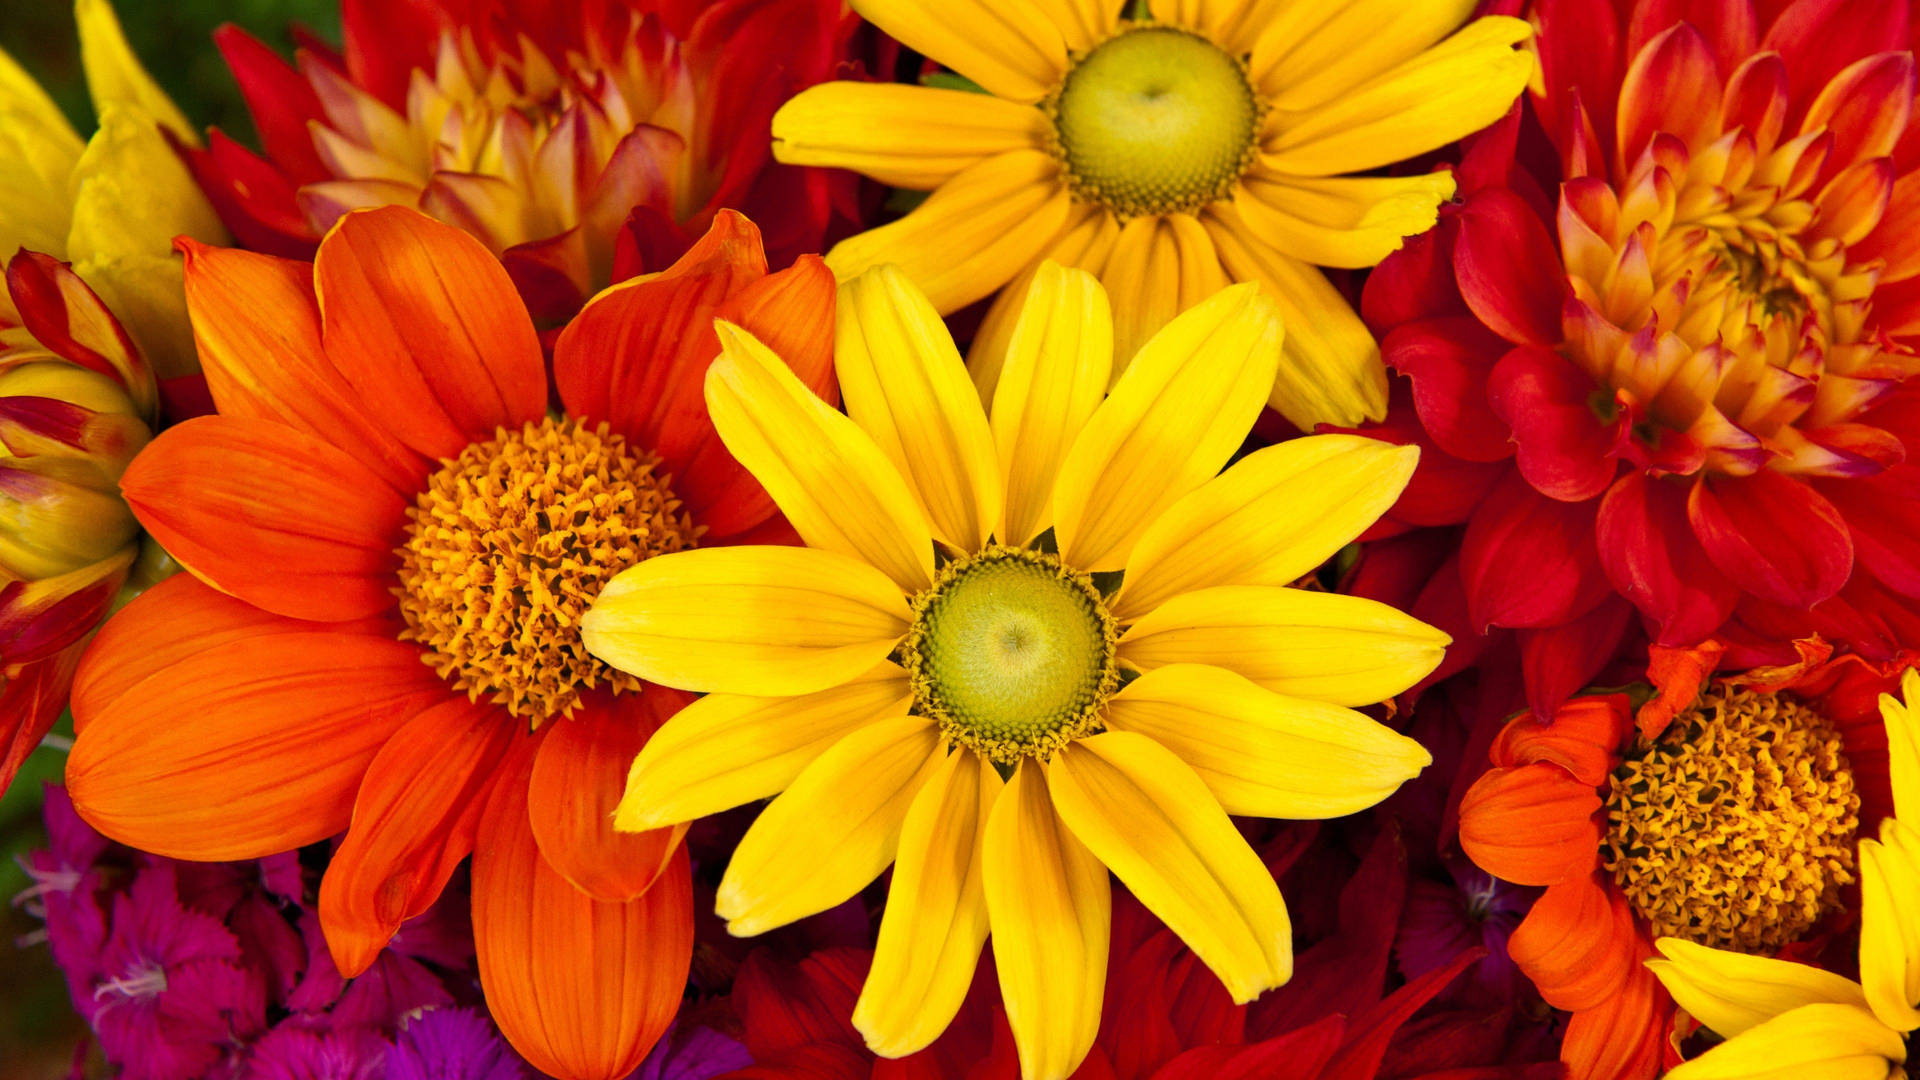 hd wallpapers of flowers 1080p